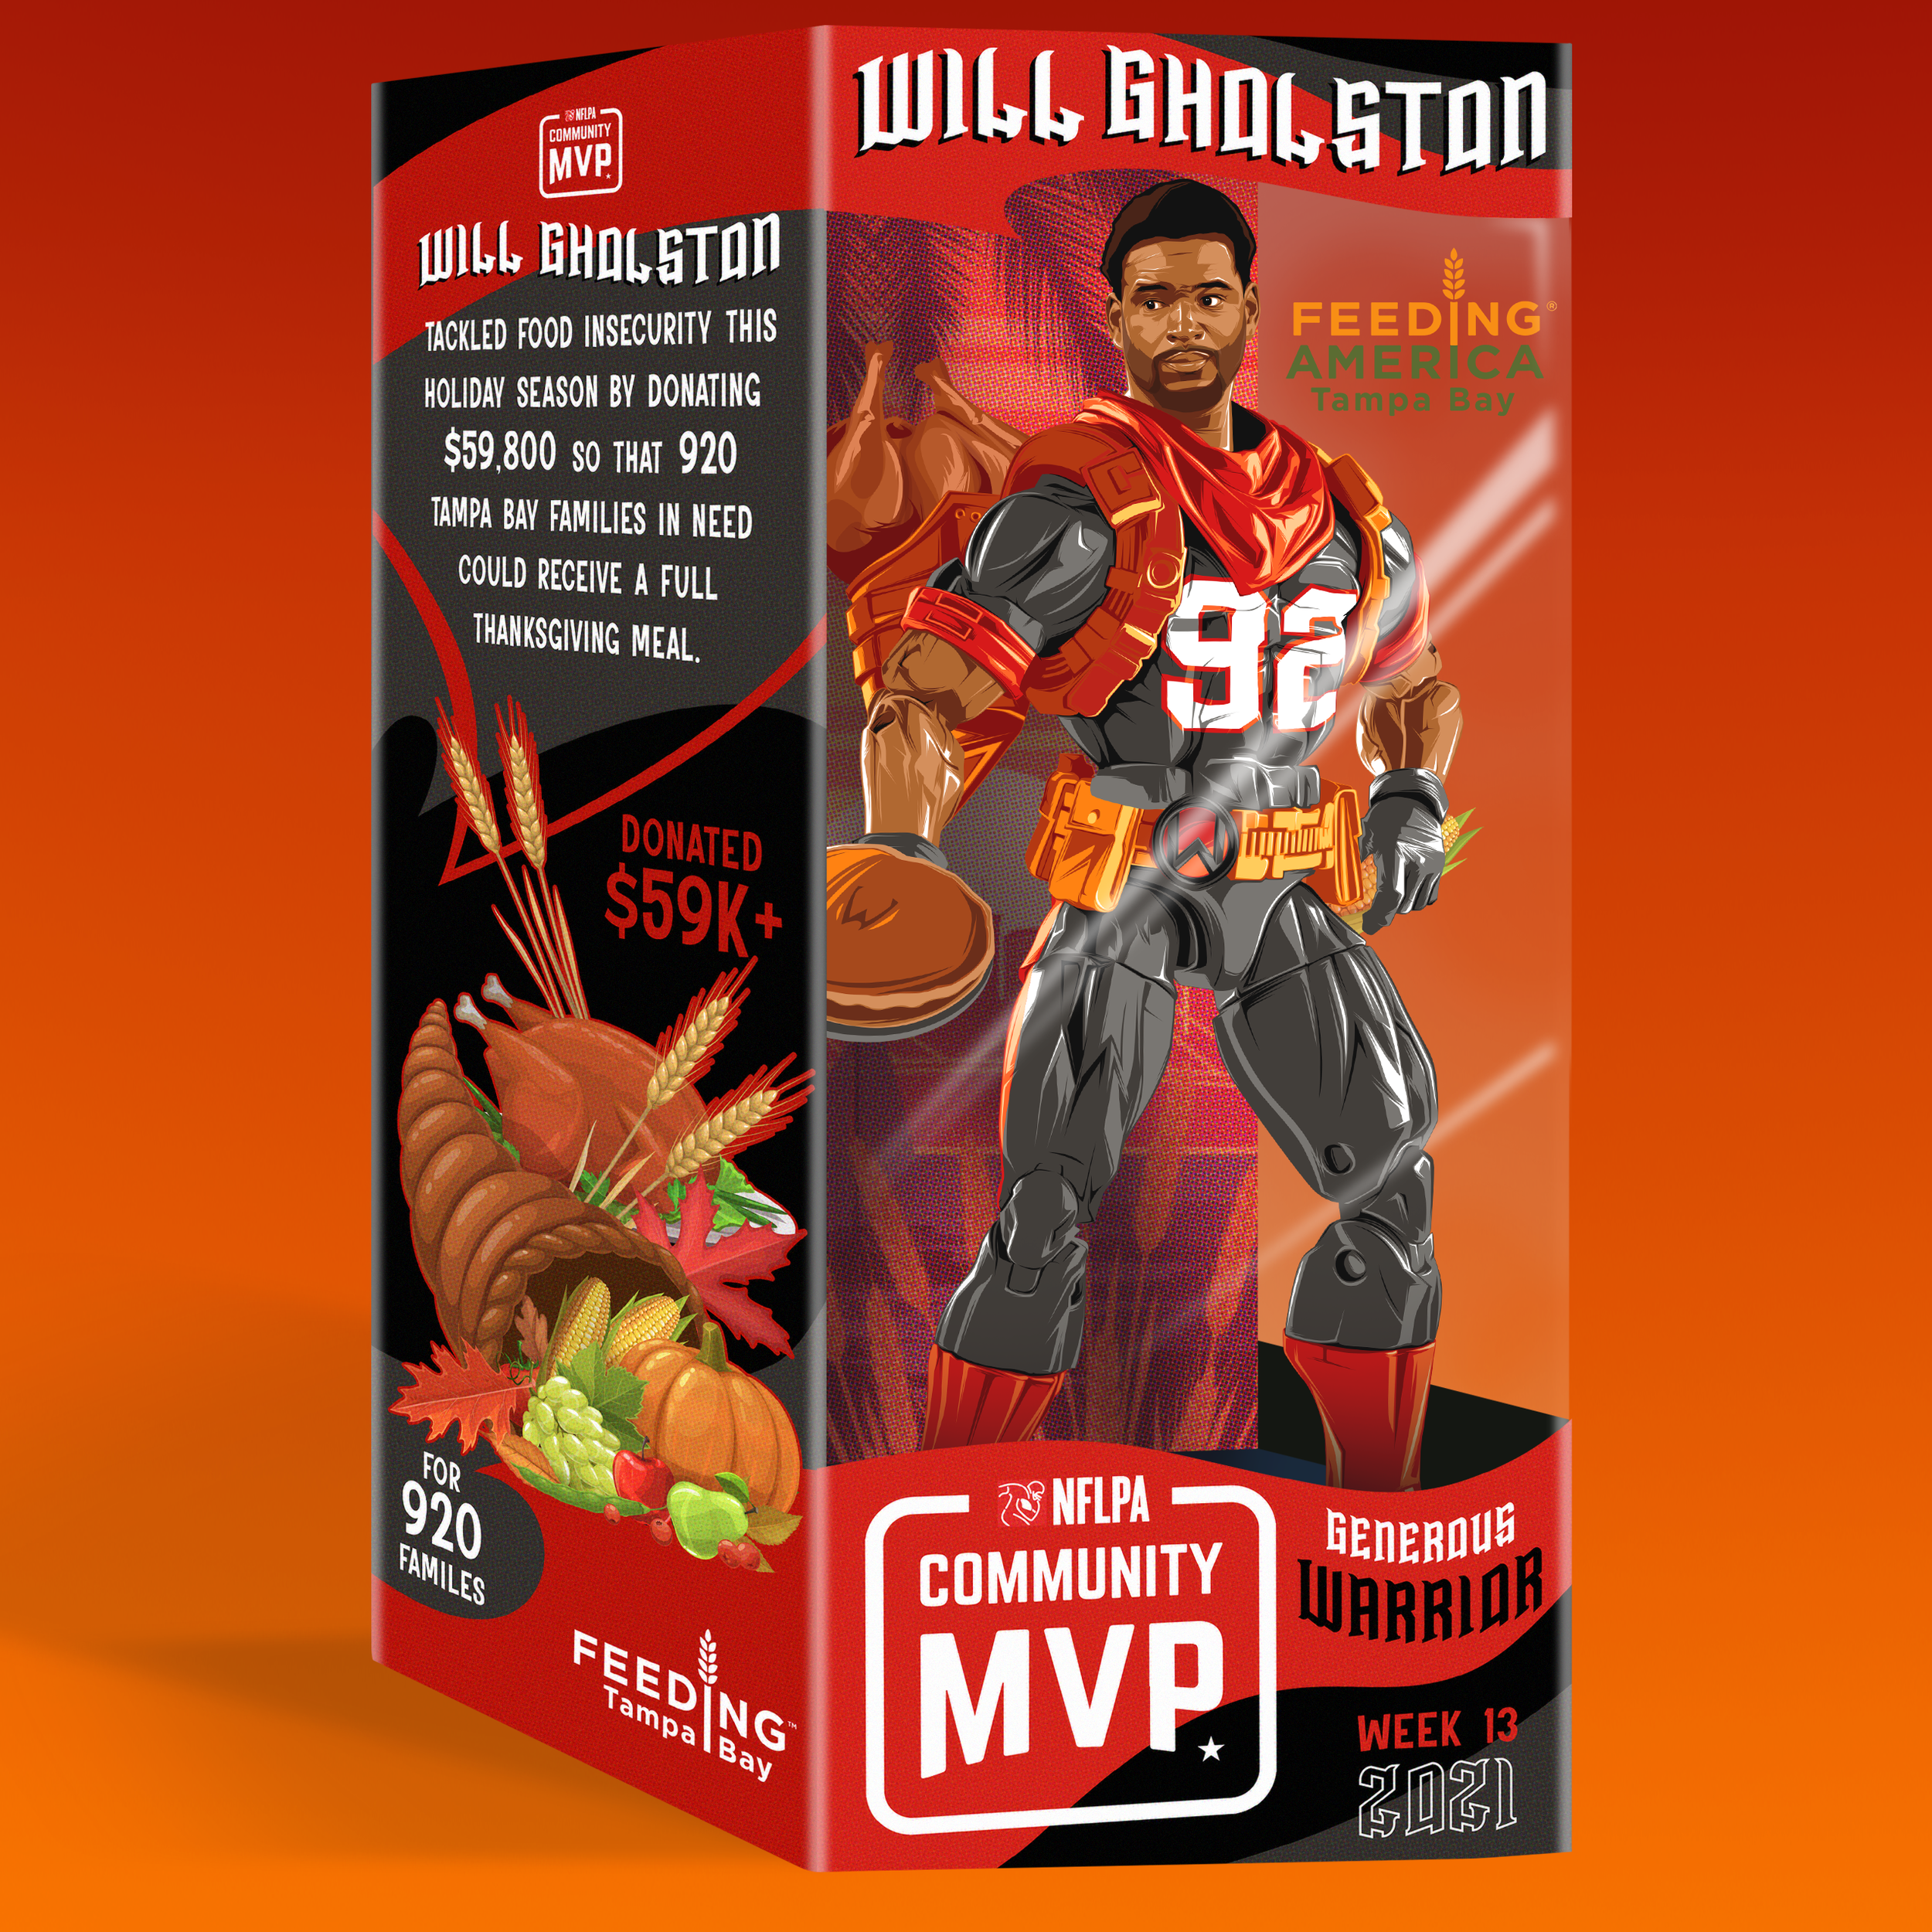 NFLPA_CMVP_W13_Will_Gholston-1x1.png